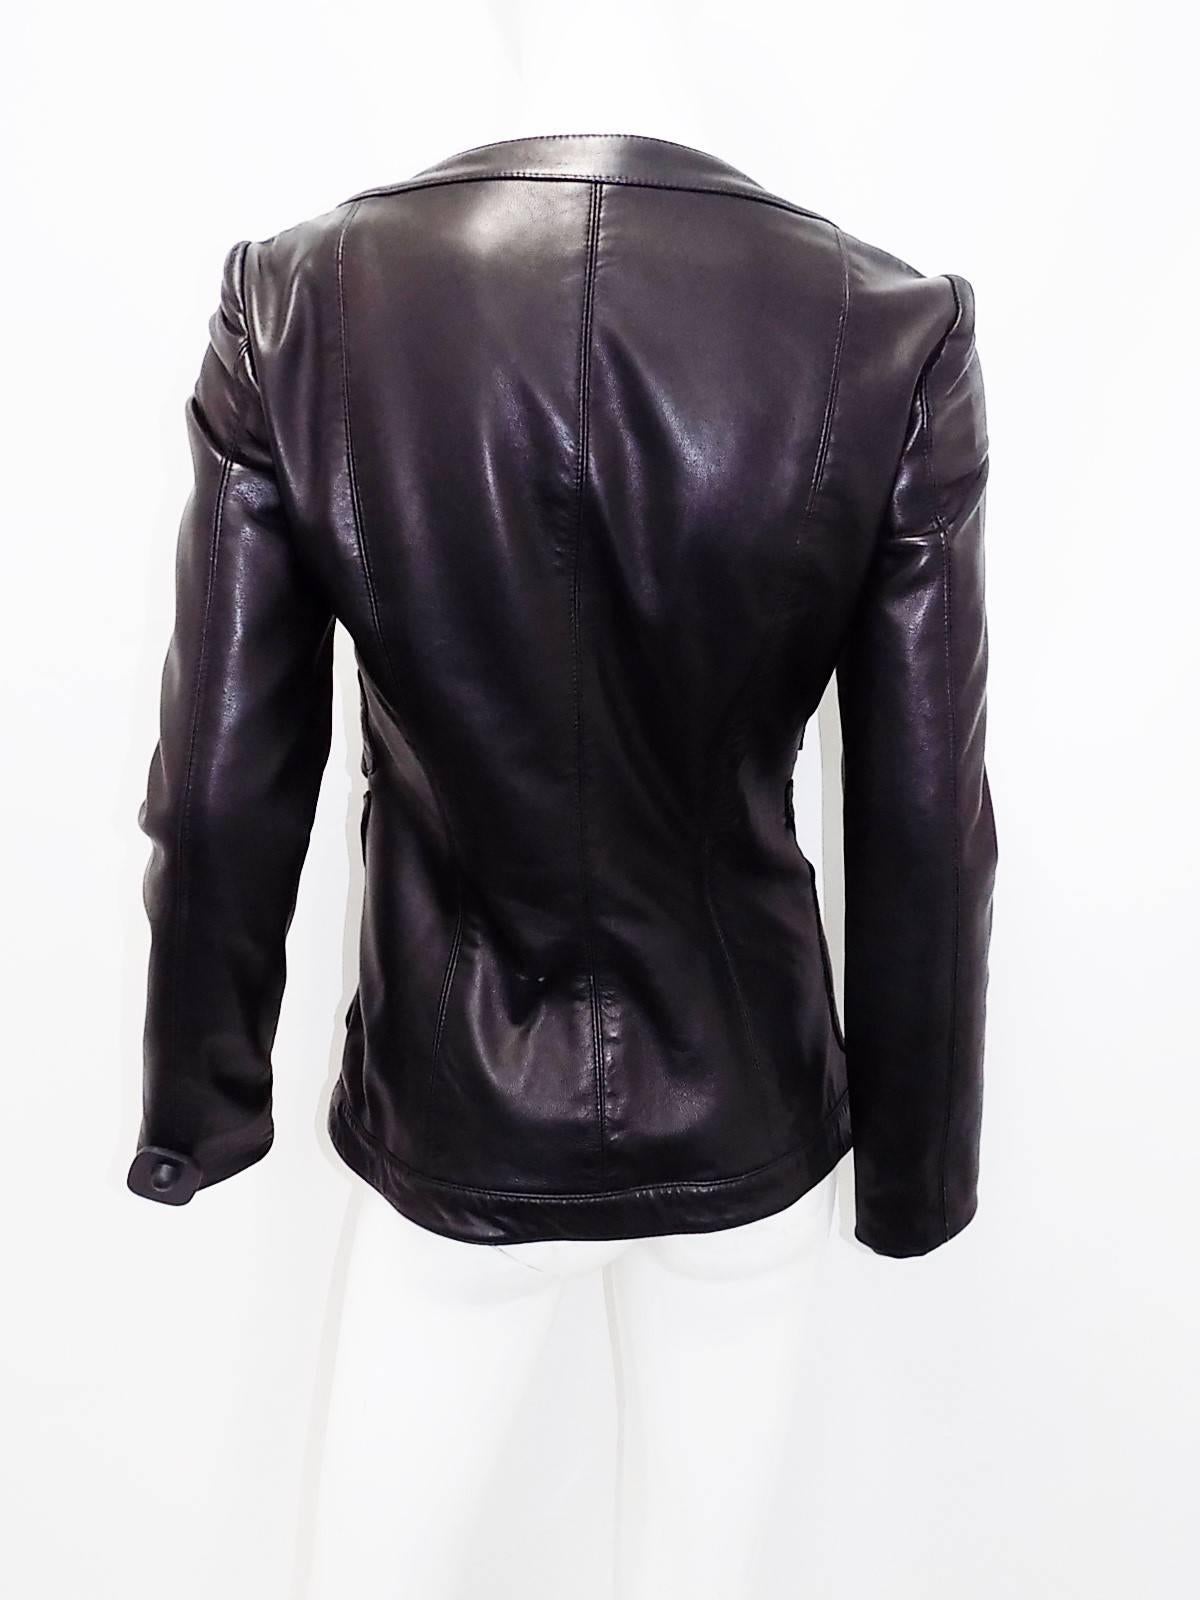 Gemma Kahng spectacular sexy Rare vintage Black Leather cutout  jacket zip front . Bird cage strips if leather with  appliques placed  over.  Buttery soft quality  leather.  Fully lined . Fabulous neckline. 
Pristine condition like new! Circa